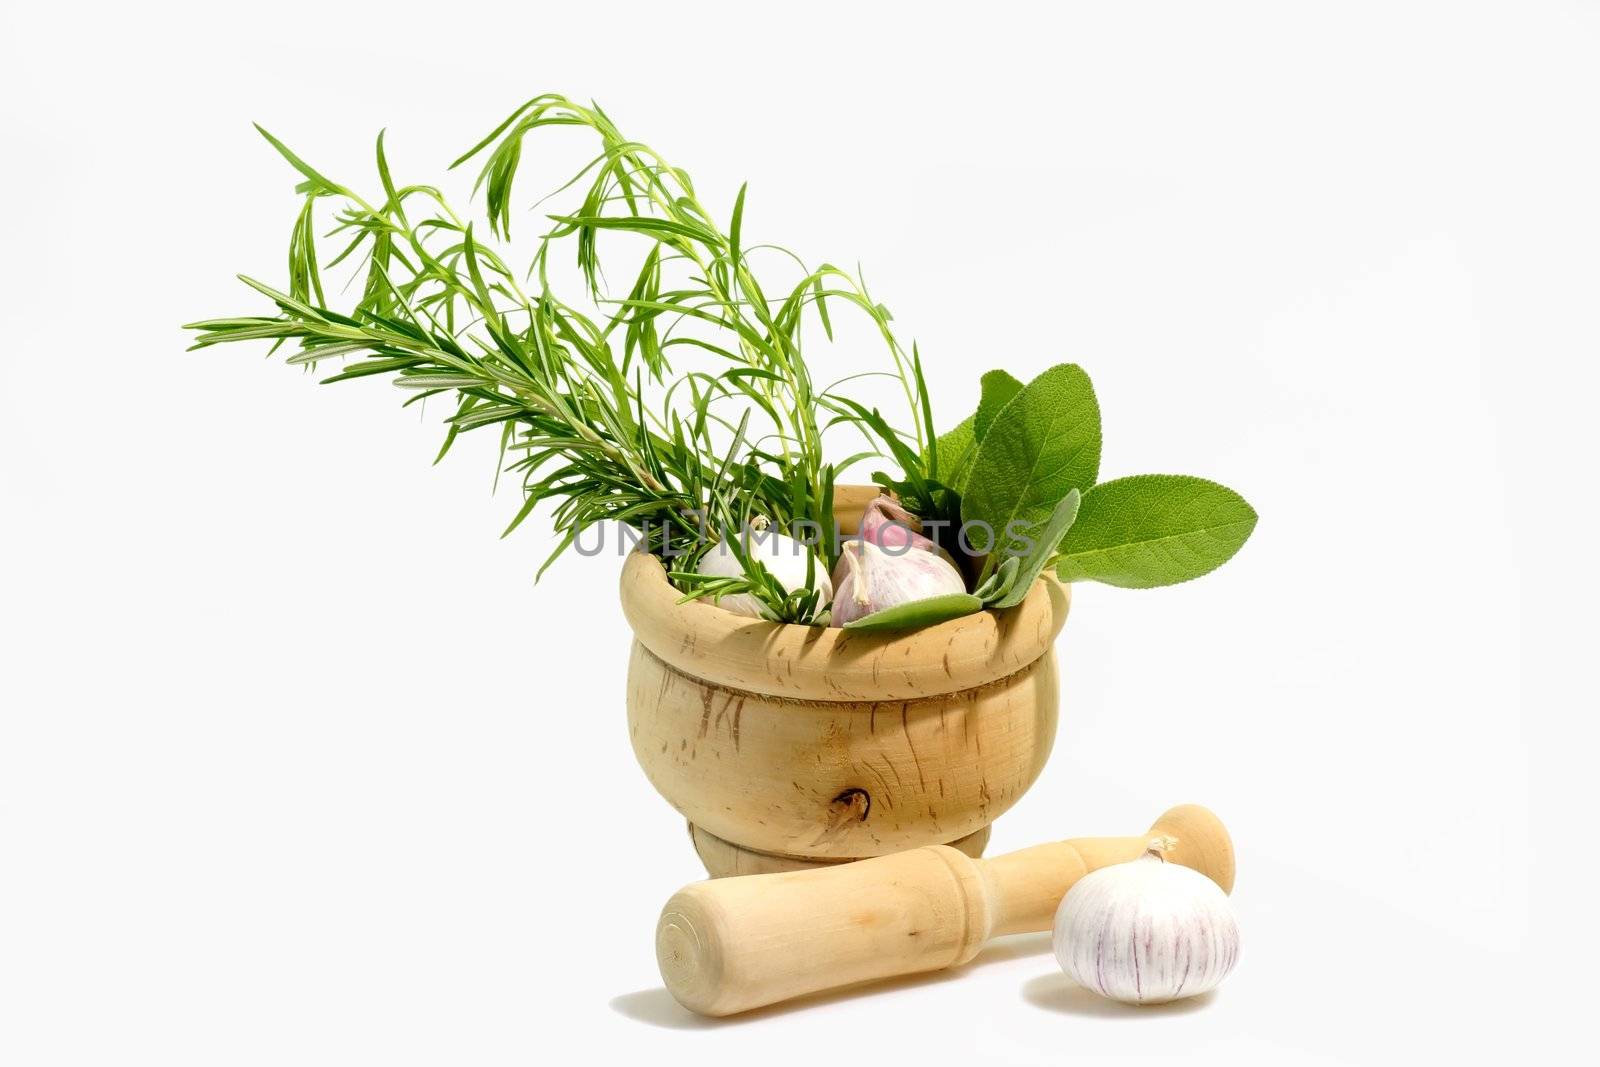 Culinary Herbs by Teamarbeit